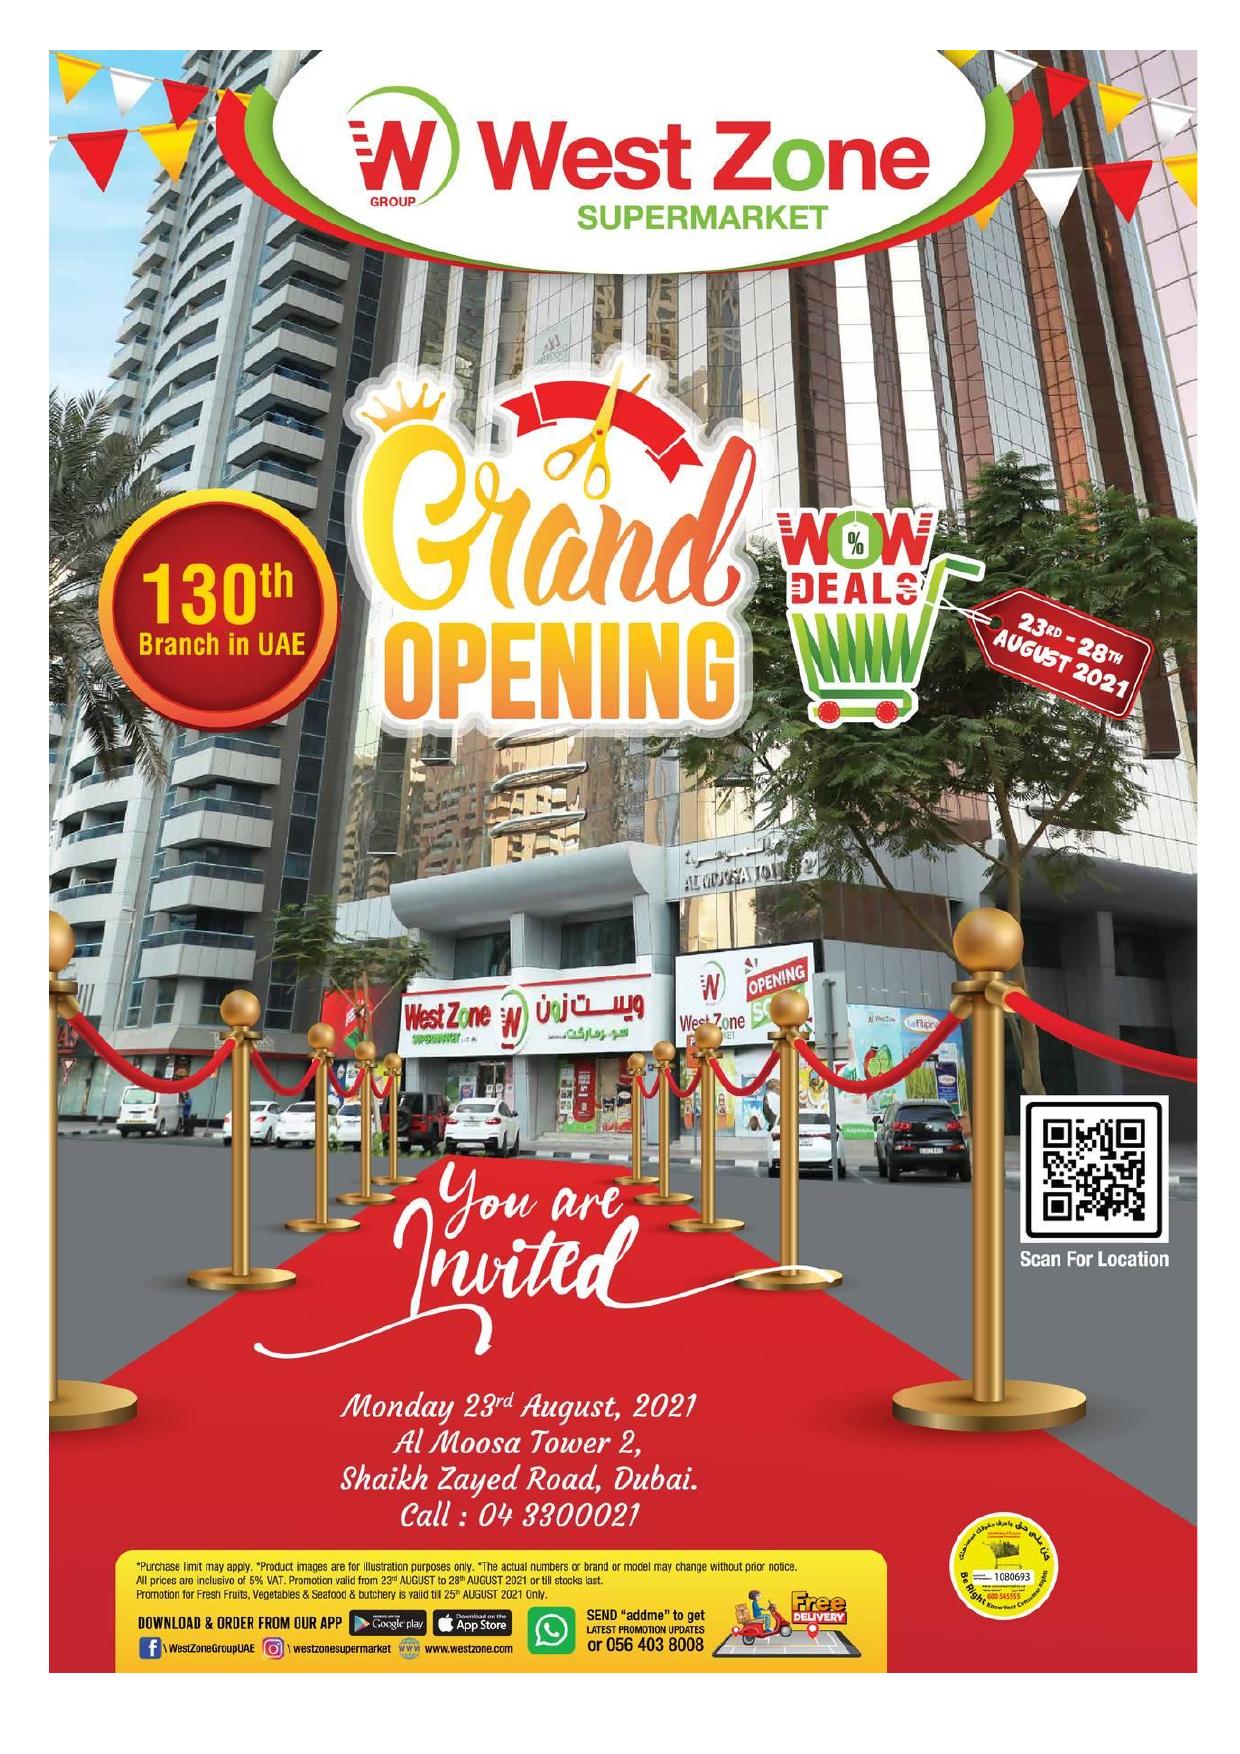 <p><span style="font-size: 18px;">Grand Opening Deals - Sheikh Zayed Road, Dubai</span><br></p>